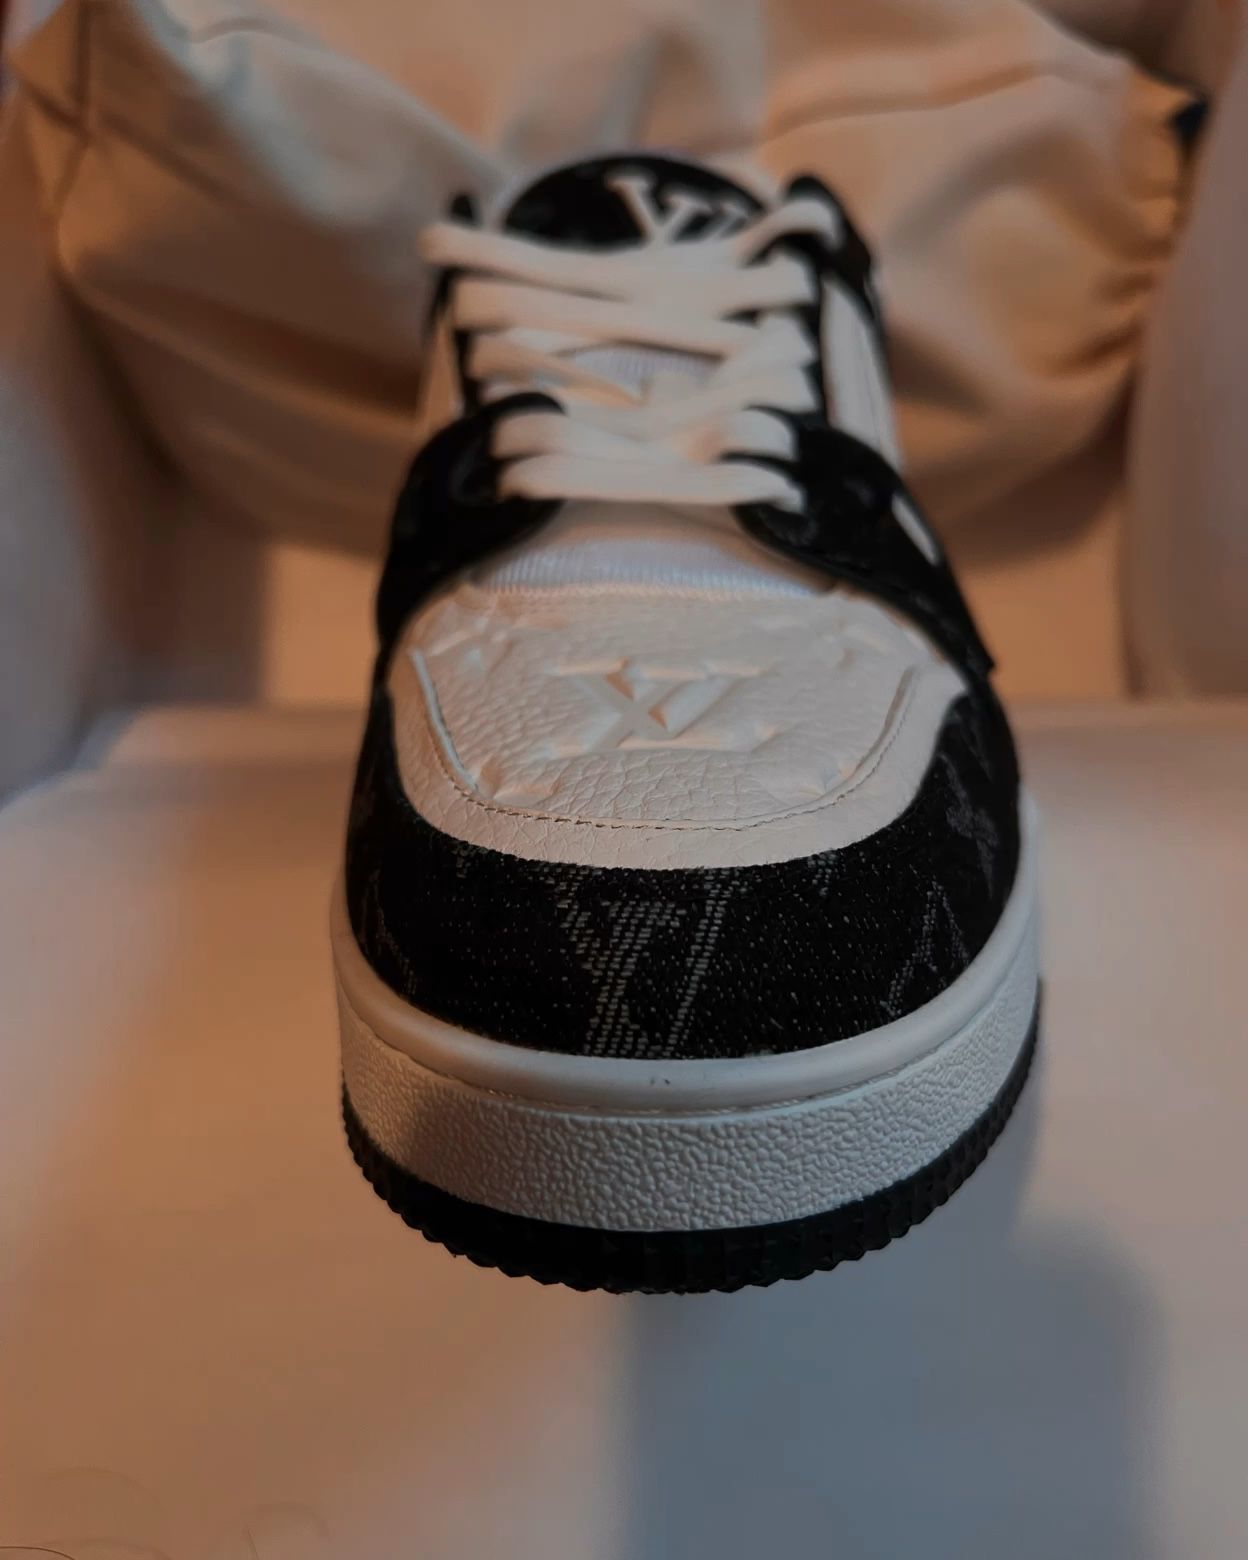 Louis vuitton Trainers LV Trainer white SS21 size 7 40 Eu for Sale in East  Patchogue, NY - OfferUp